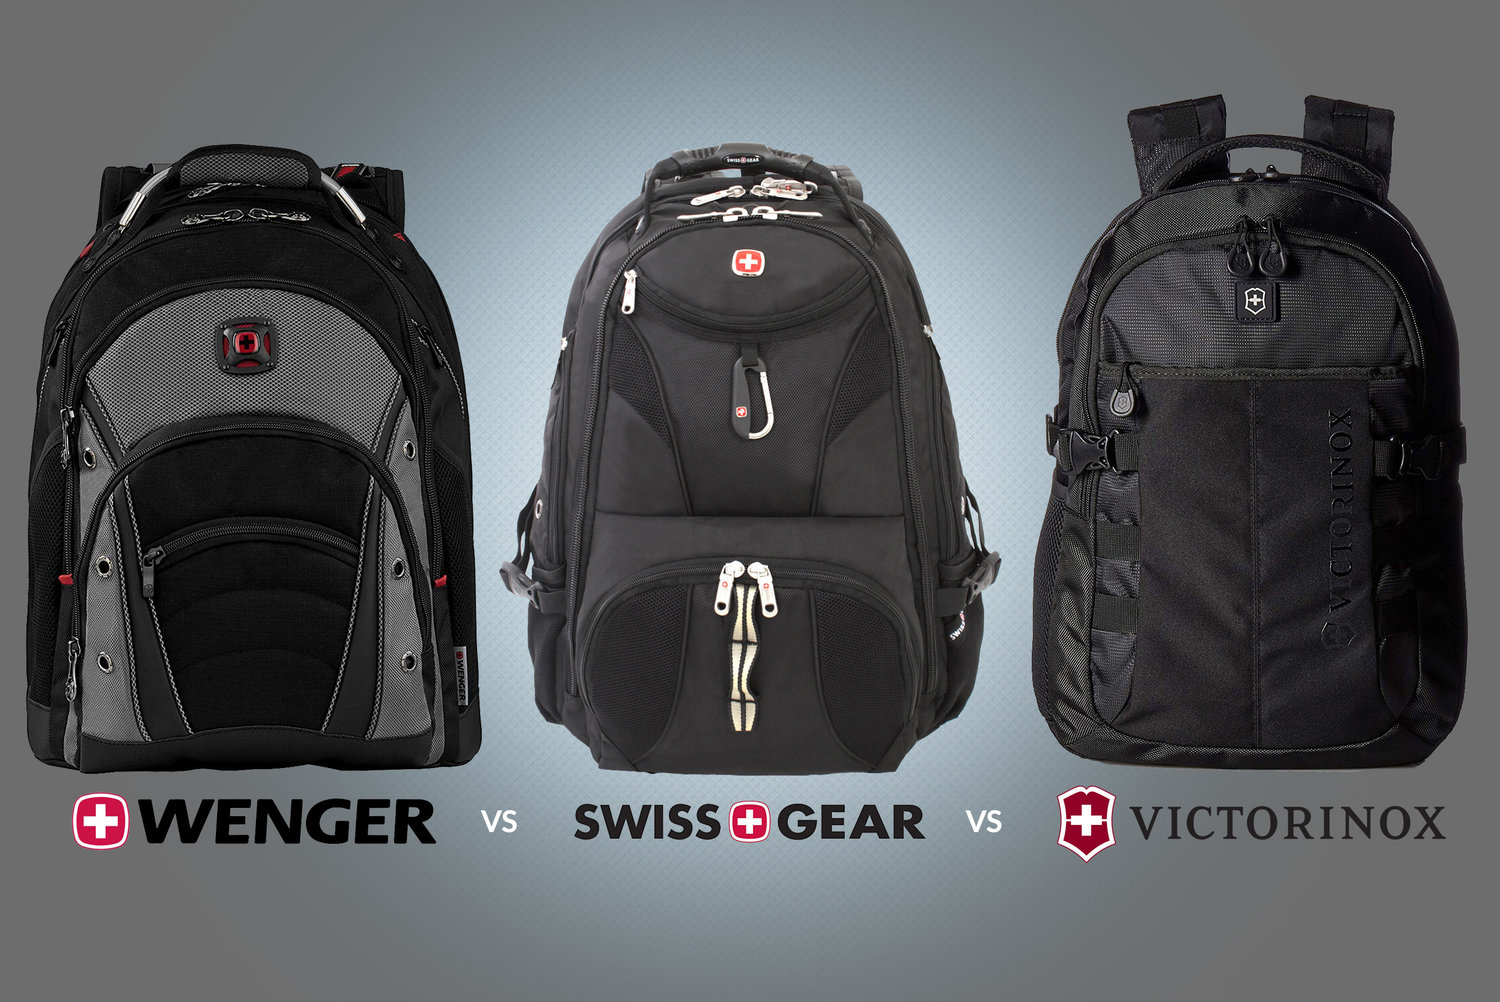 Wenger vs vs Swiss - What's the difference? Backpackies